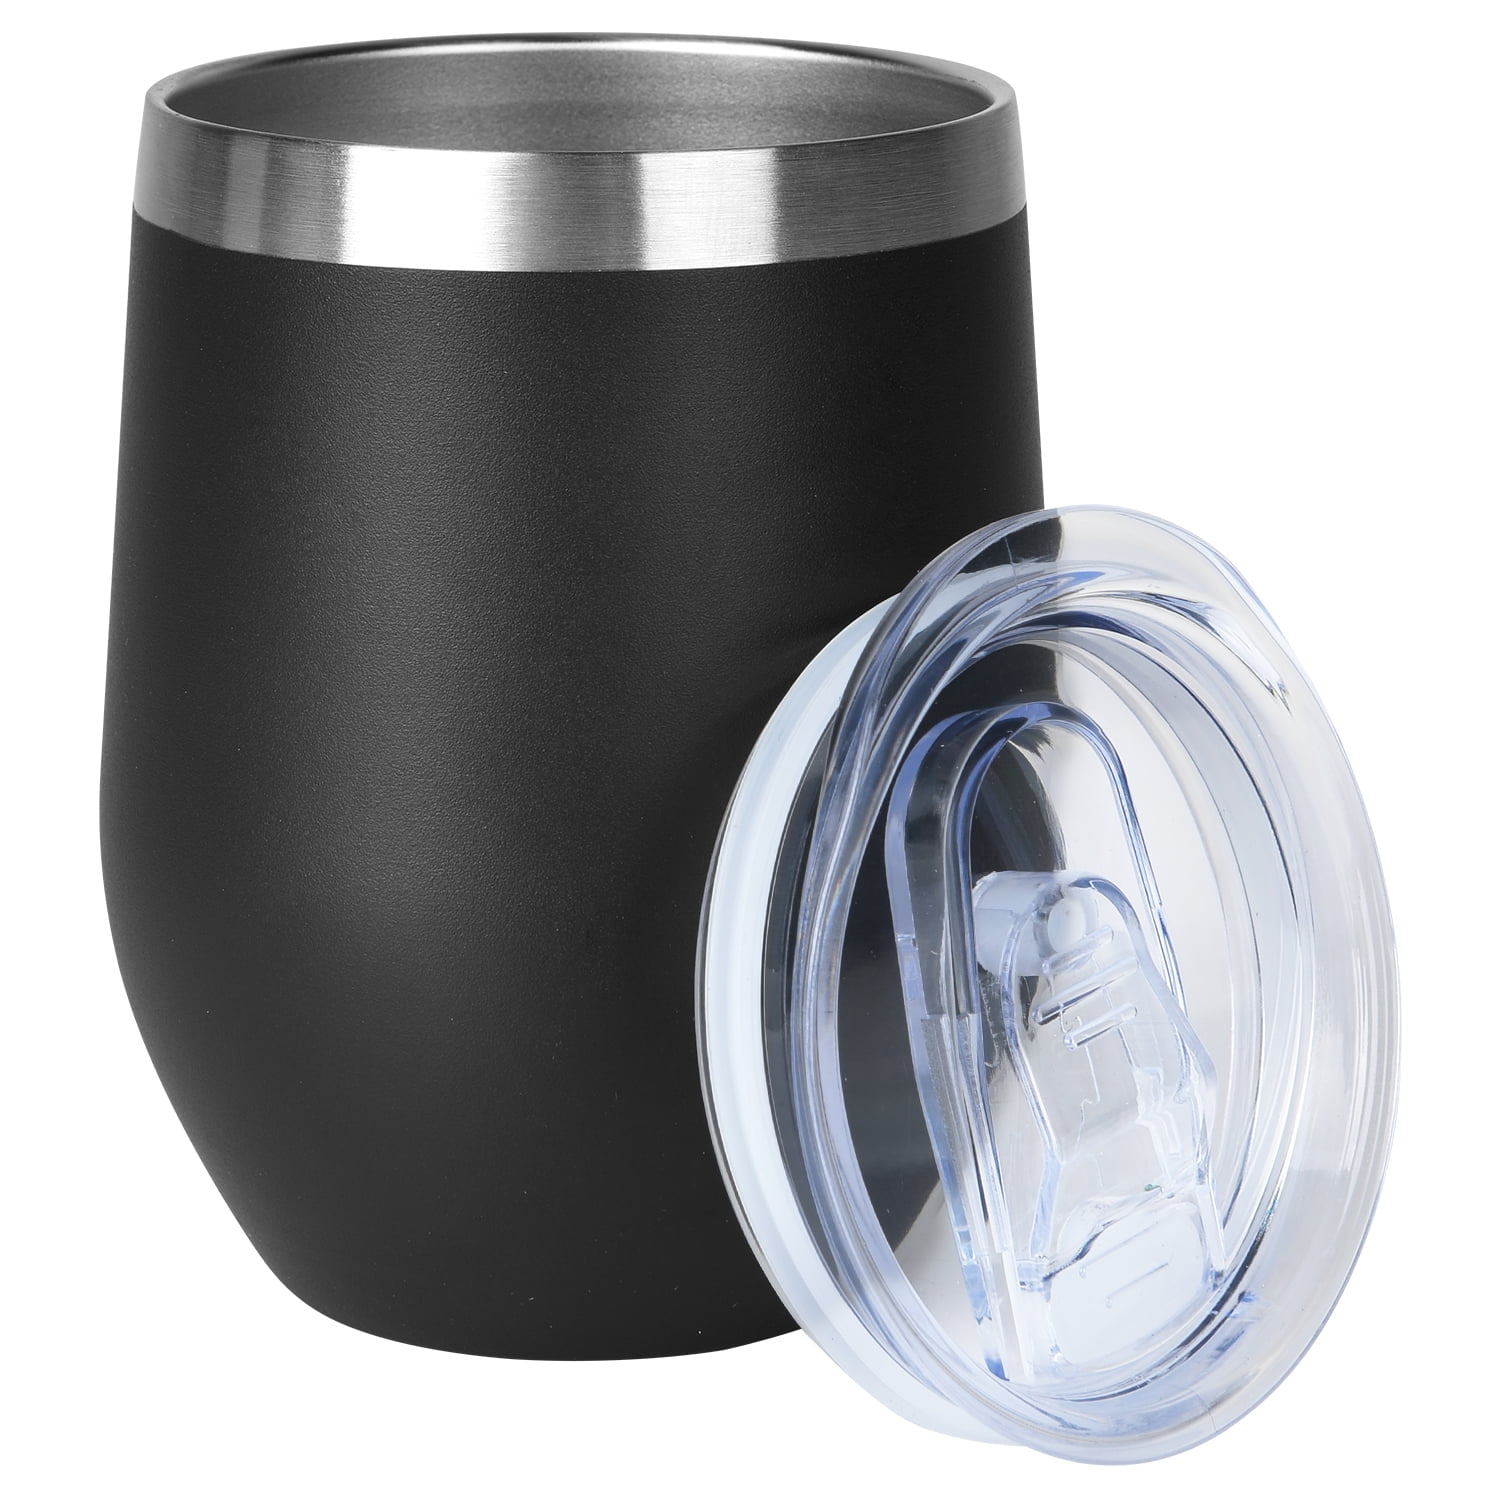 AMZUShome Stainless Steel Wine Glasses Cups.Double Walled Vacuum Insulated  Wine Tumbler With Lid and…See more AMZUShome Stainless Steel Wine Glasses